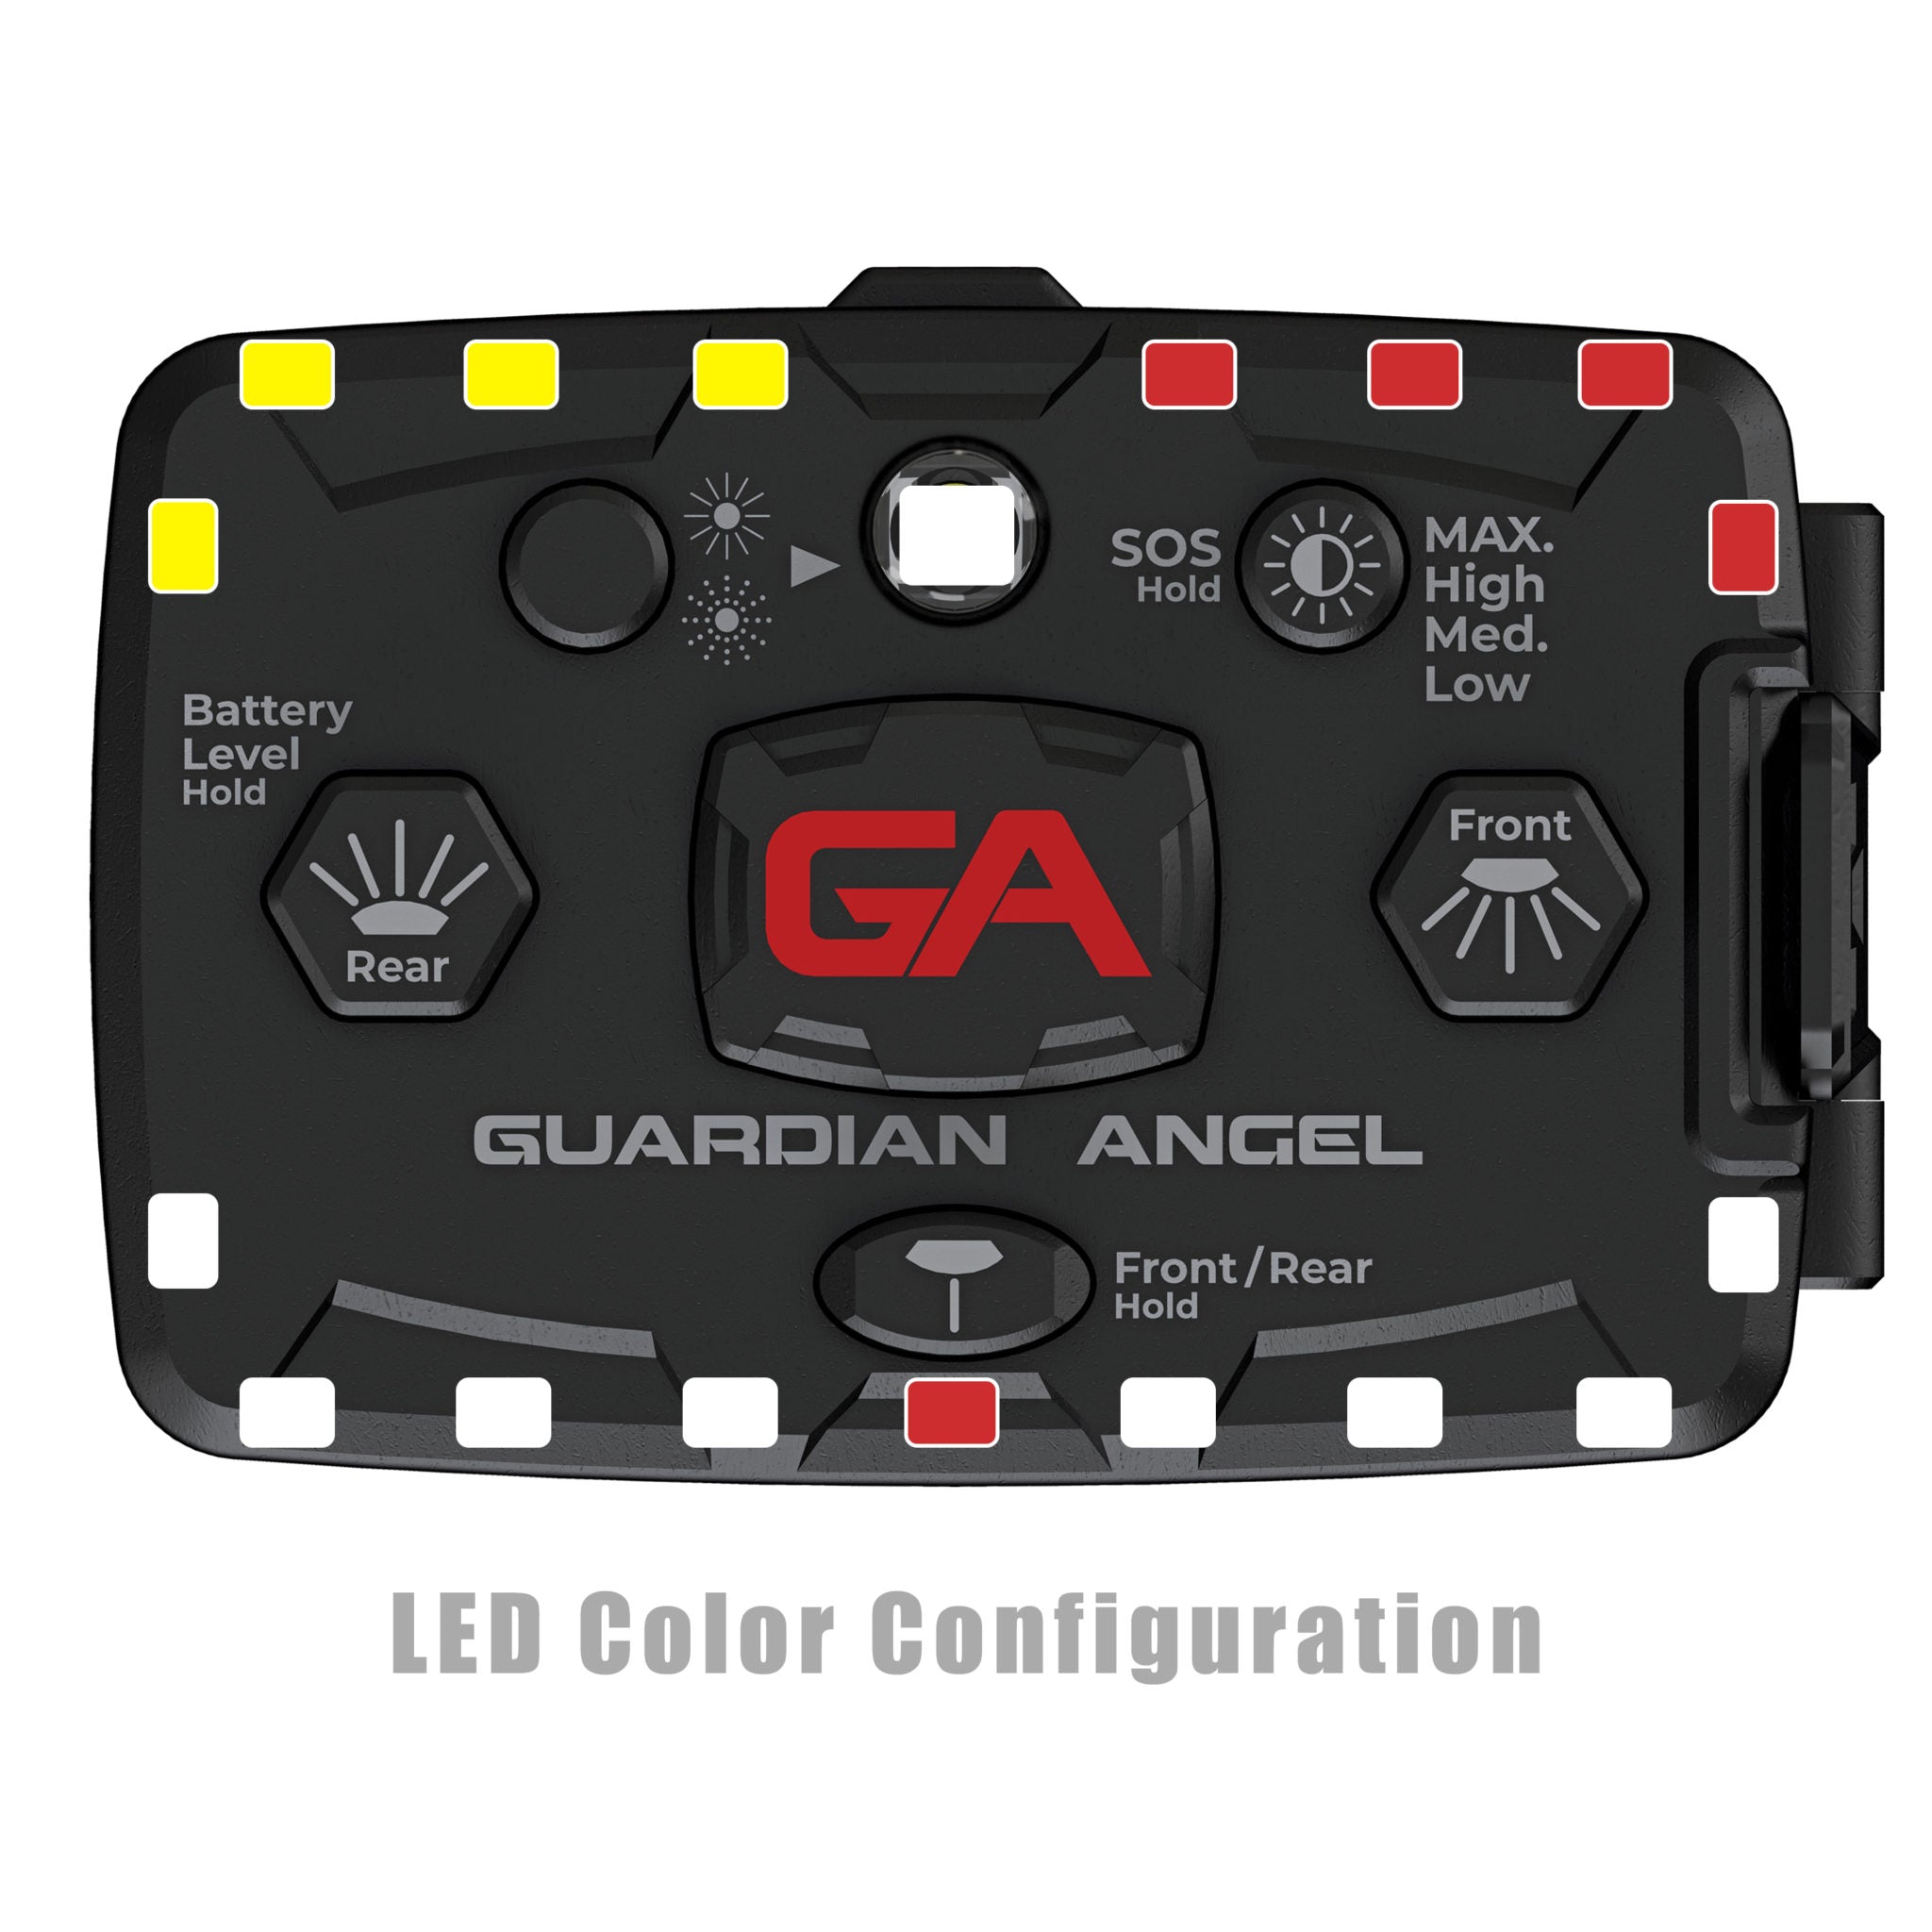 Guardian Angel Elite White/Red & Yellow Wearable Safety Light (ELT-W/RY)